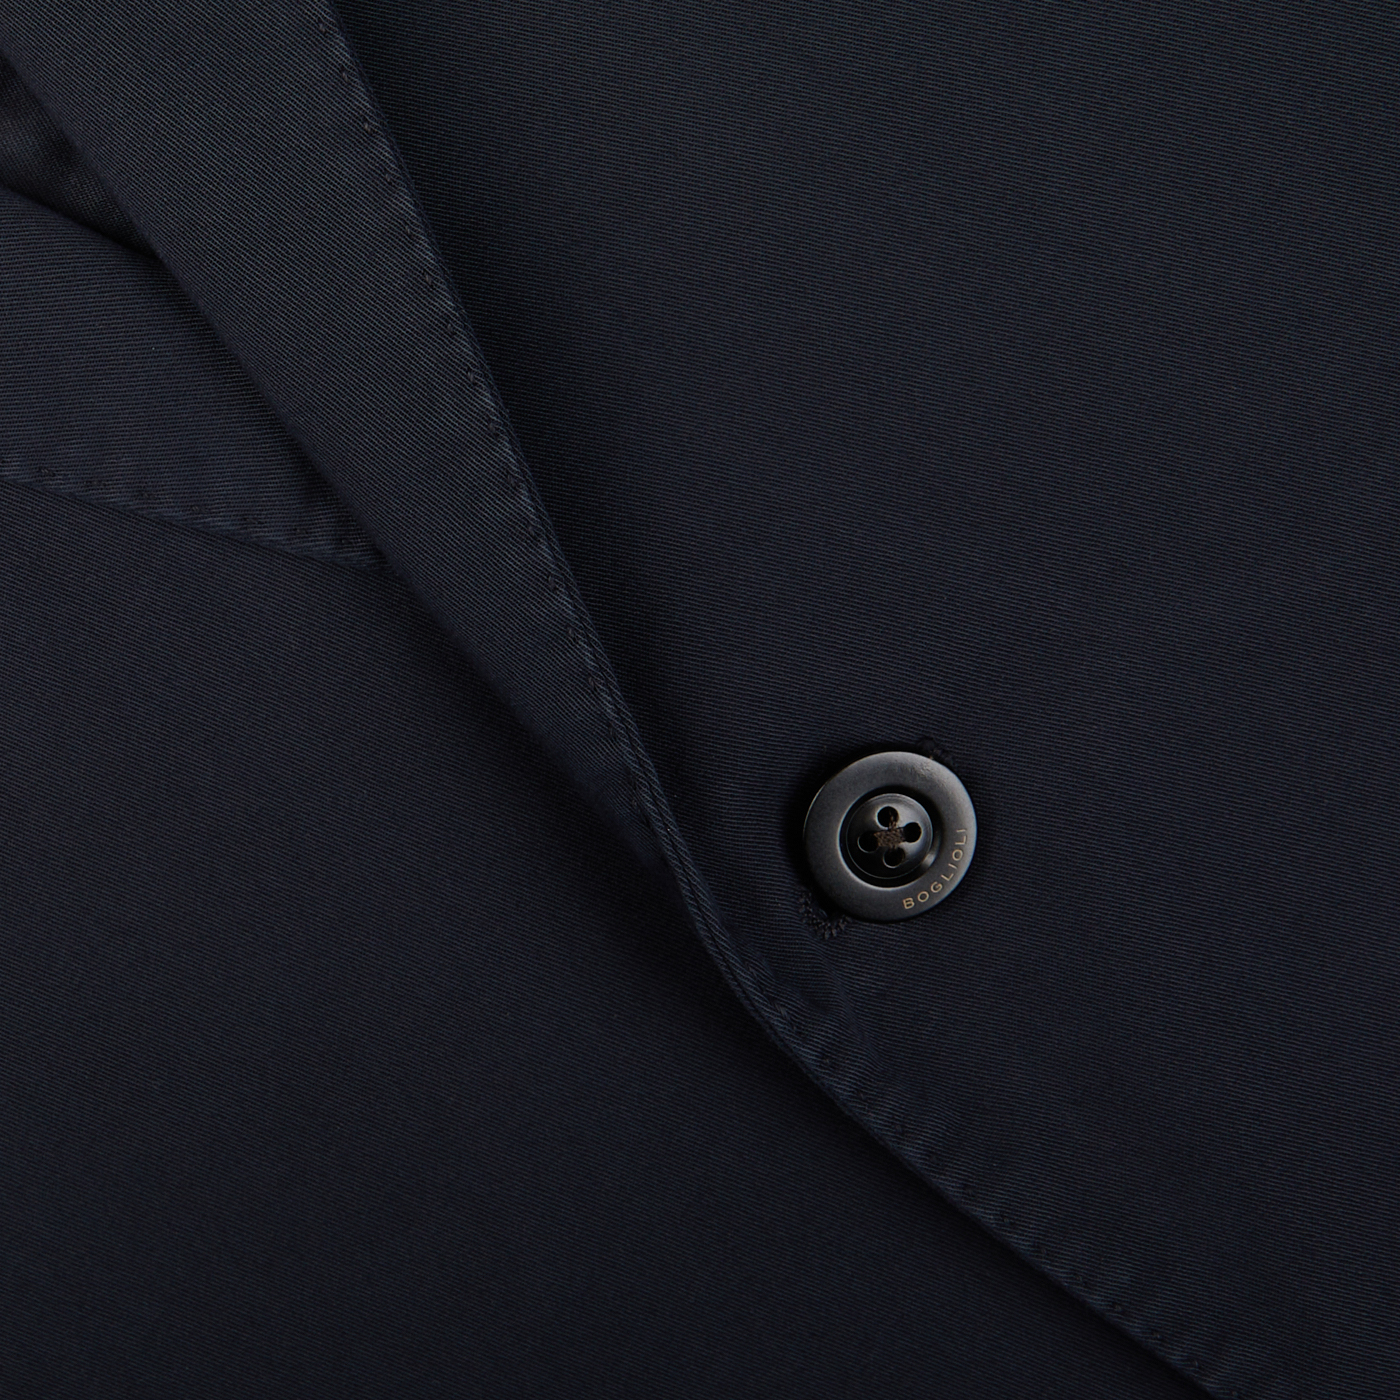 Close-up of a black button on dark fabric, likely a piece of Navy Blue Washed Cotton K Jacket crafted by Boglioli in Italy.